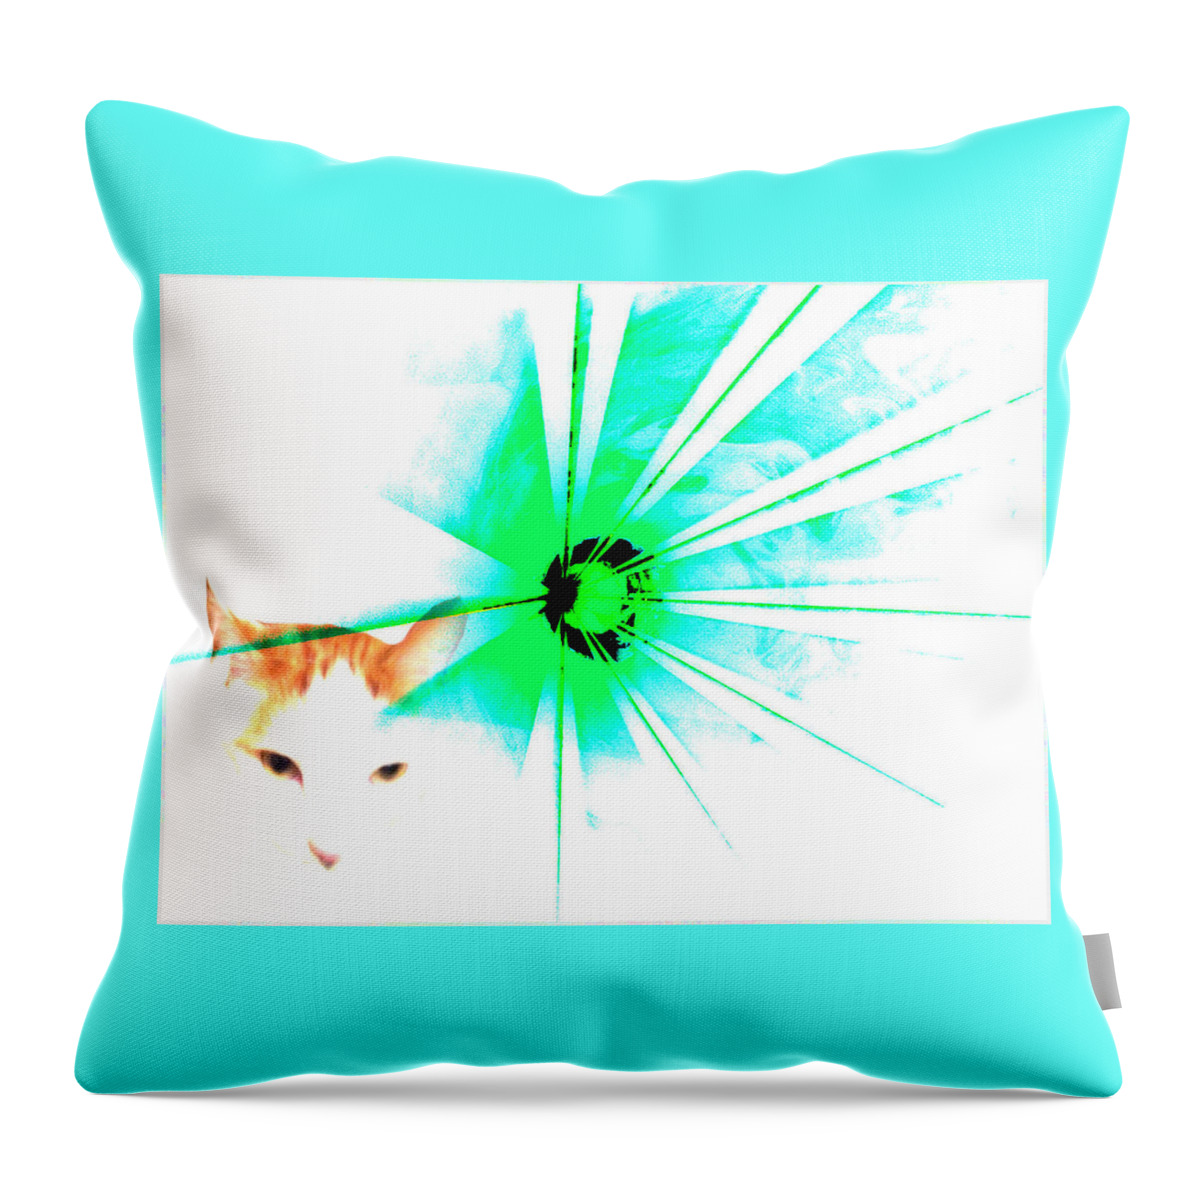  From Journey Through The Burning Throw Pillow featuring the photograph Cats Secret by The Lovelock experience